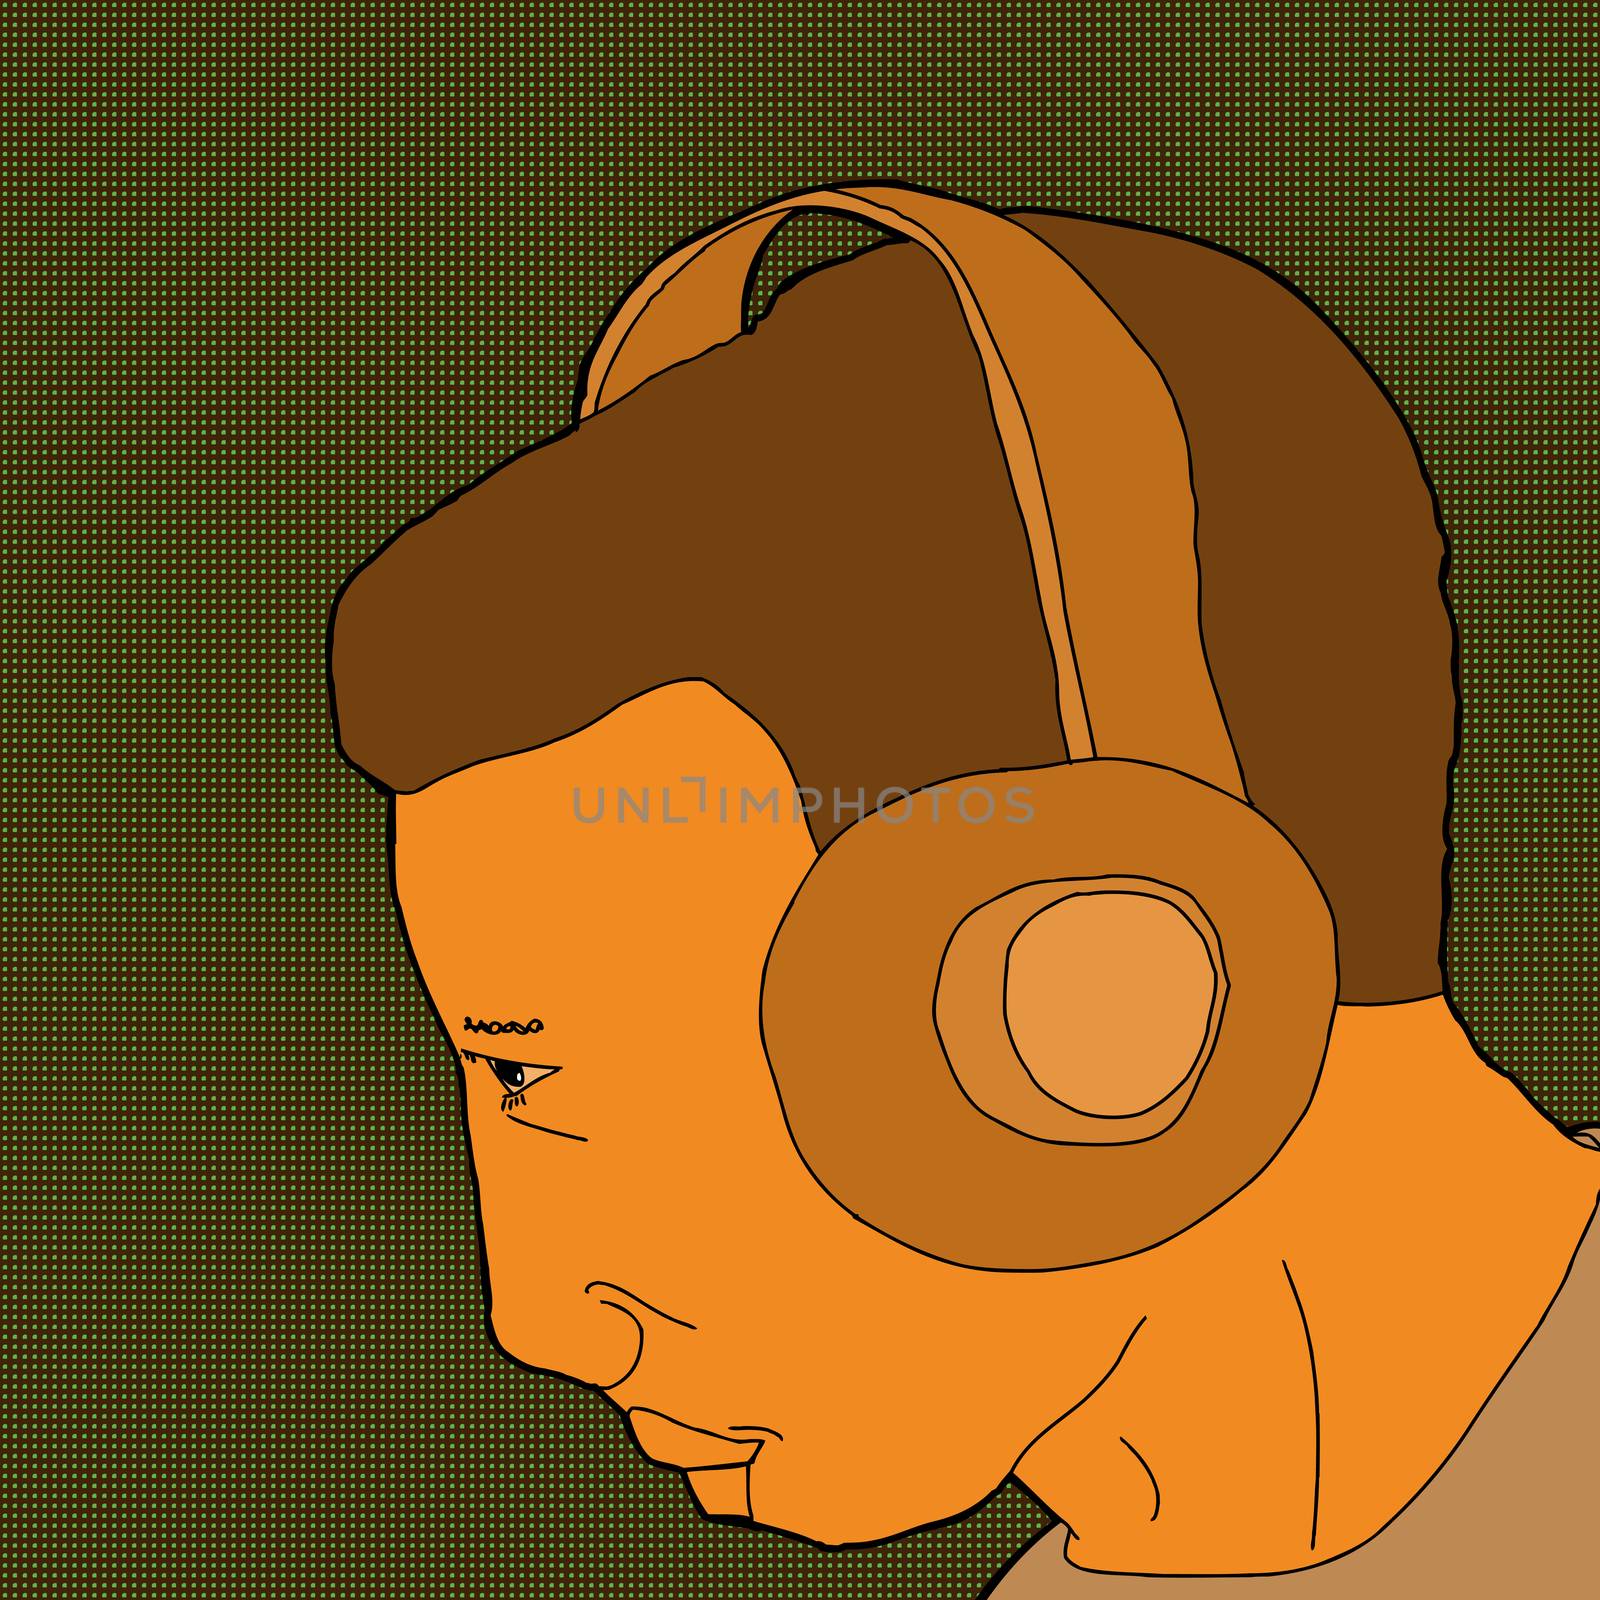 Abstract cartoon of young man listening to headphones